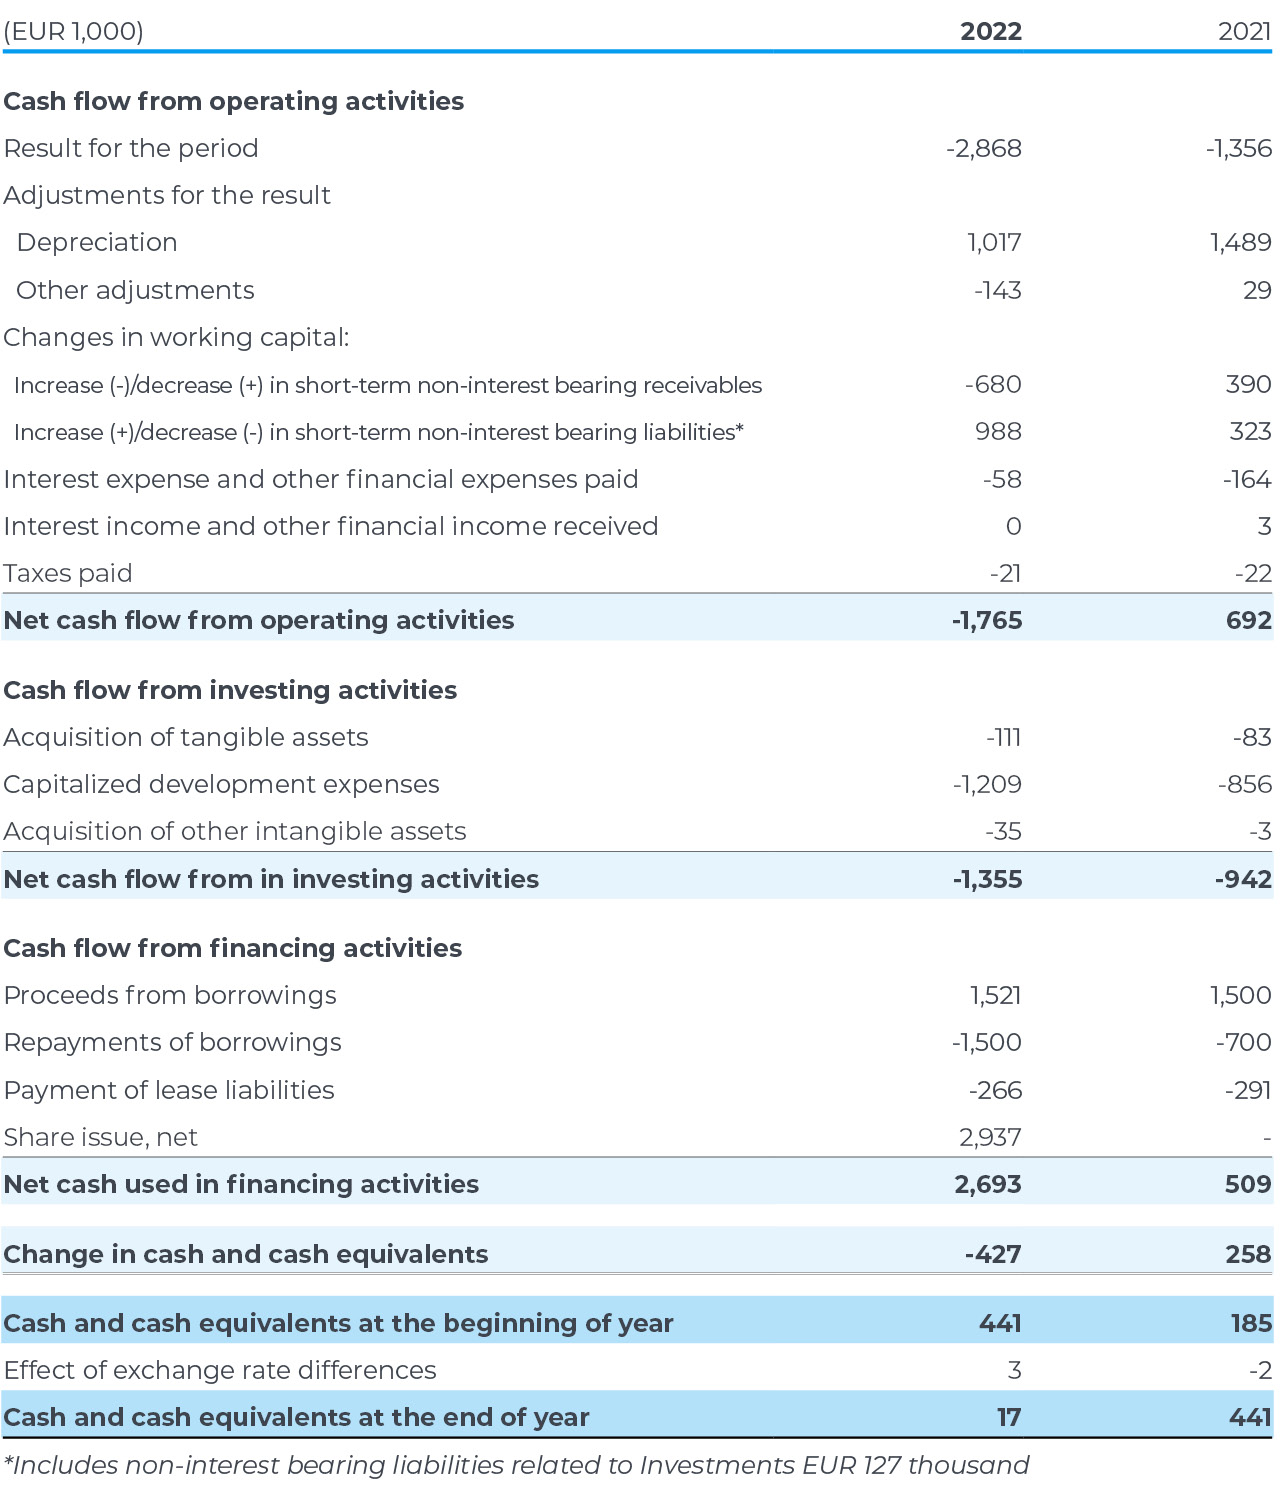 Consolidated Cash Flow Statement (IFRS)